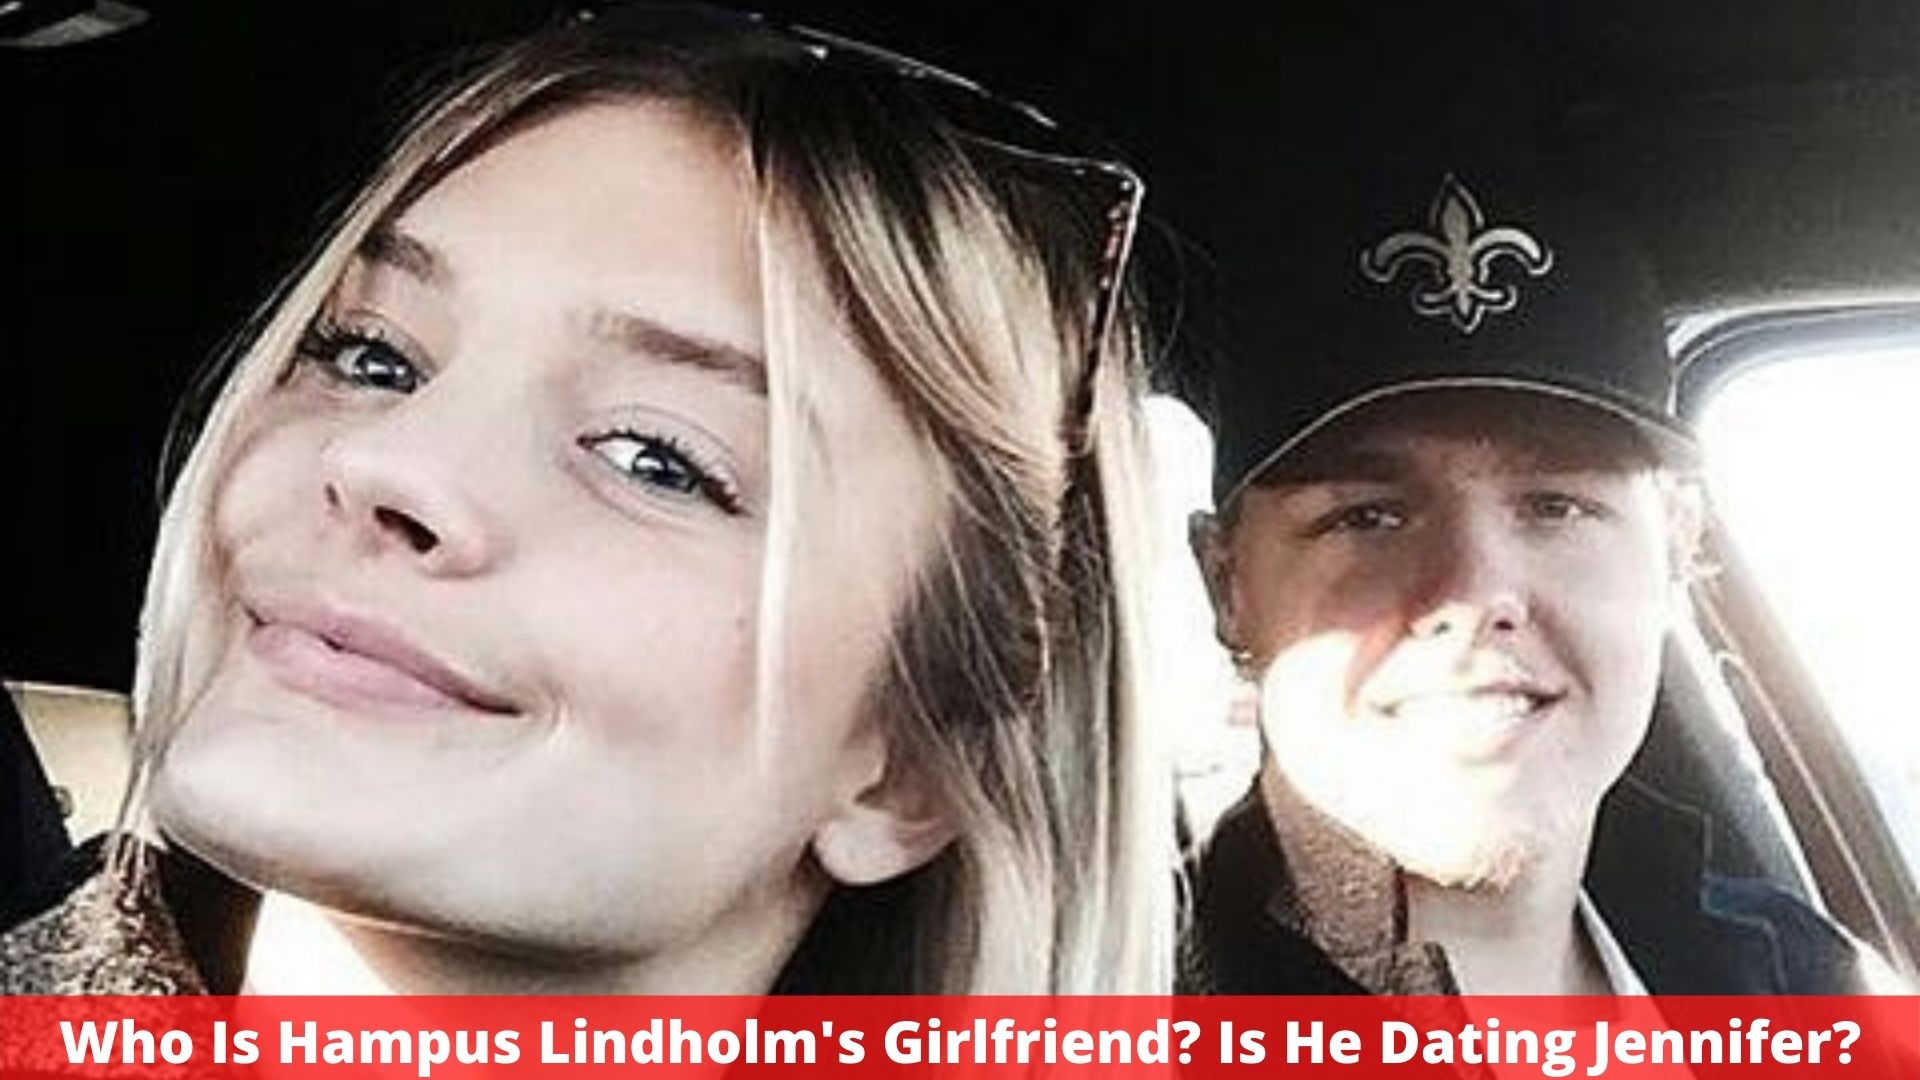 Who Is Hampus Lindholm's Girlfriend? Is He Dating Jennifer?